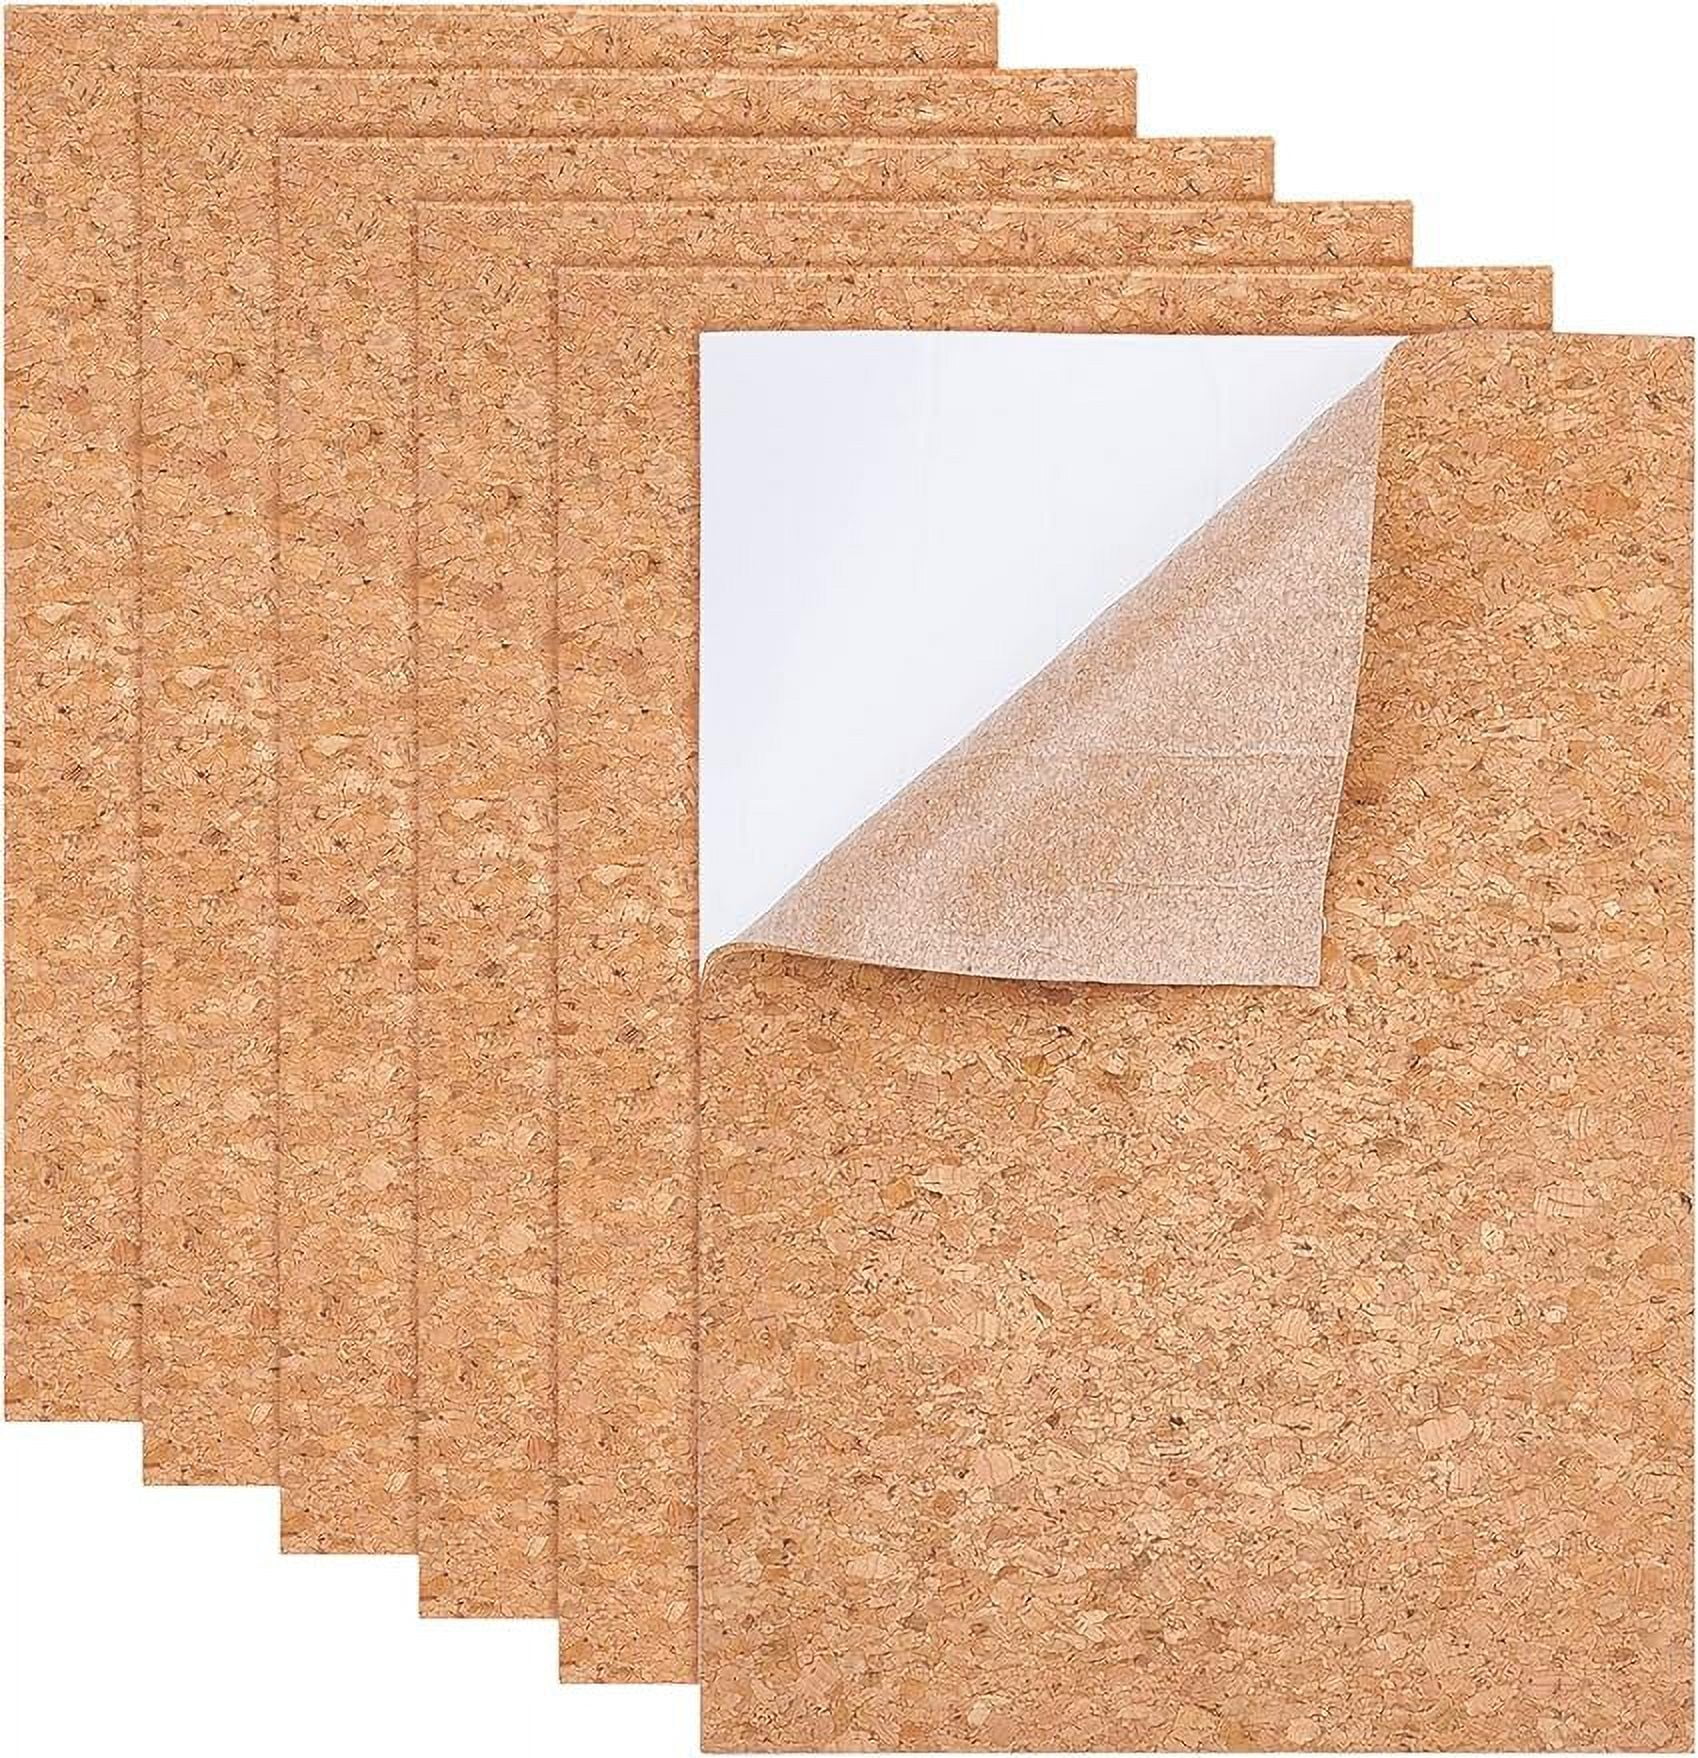 1ROLL Self-Adhesive Cork Roll 1 mm Thick Cork Mat with Strong Adhesive-Backed, Size: 150 mm x 1 mm, Brown